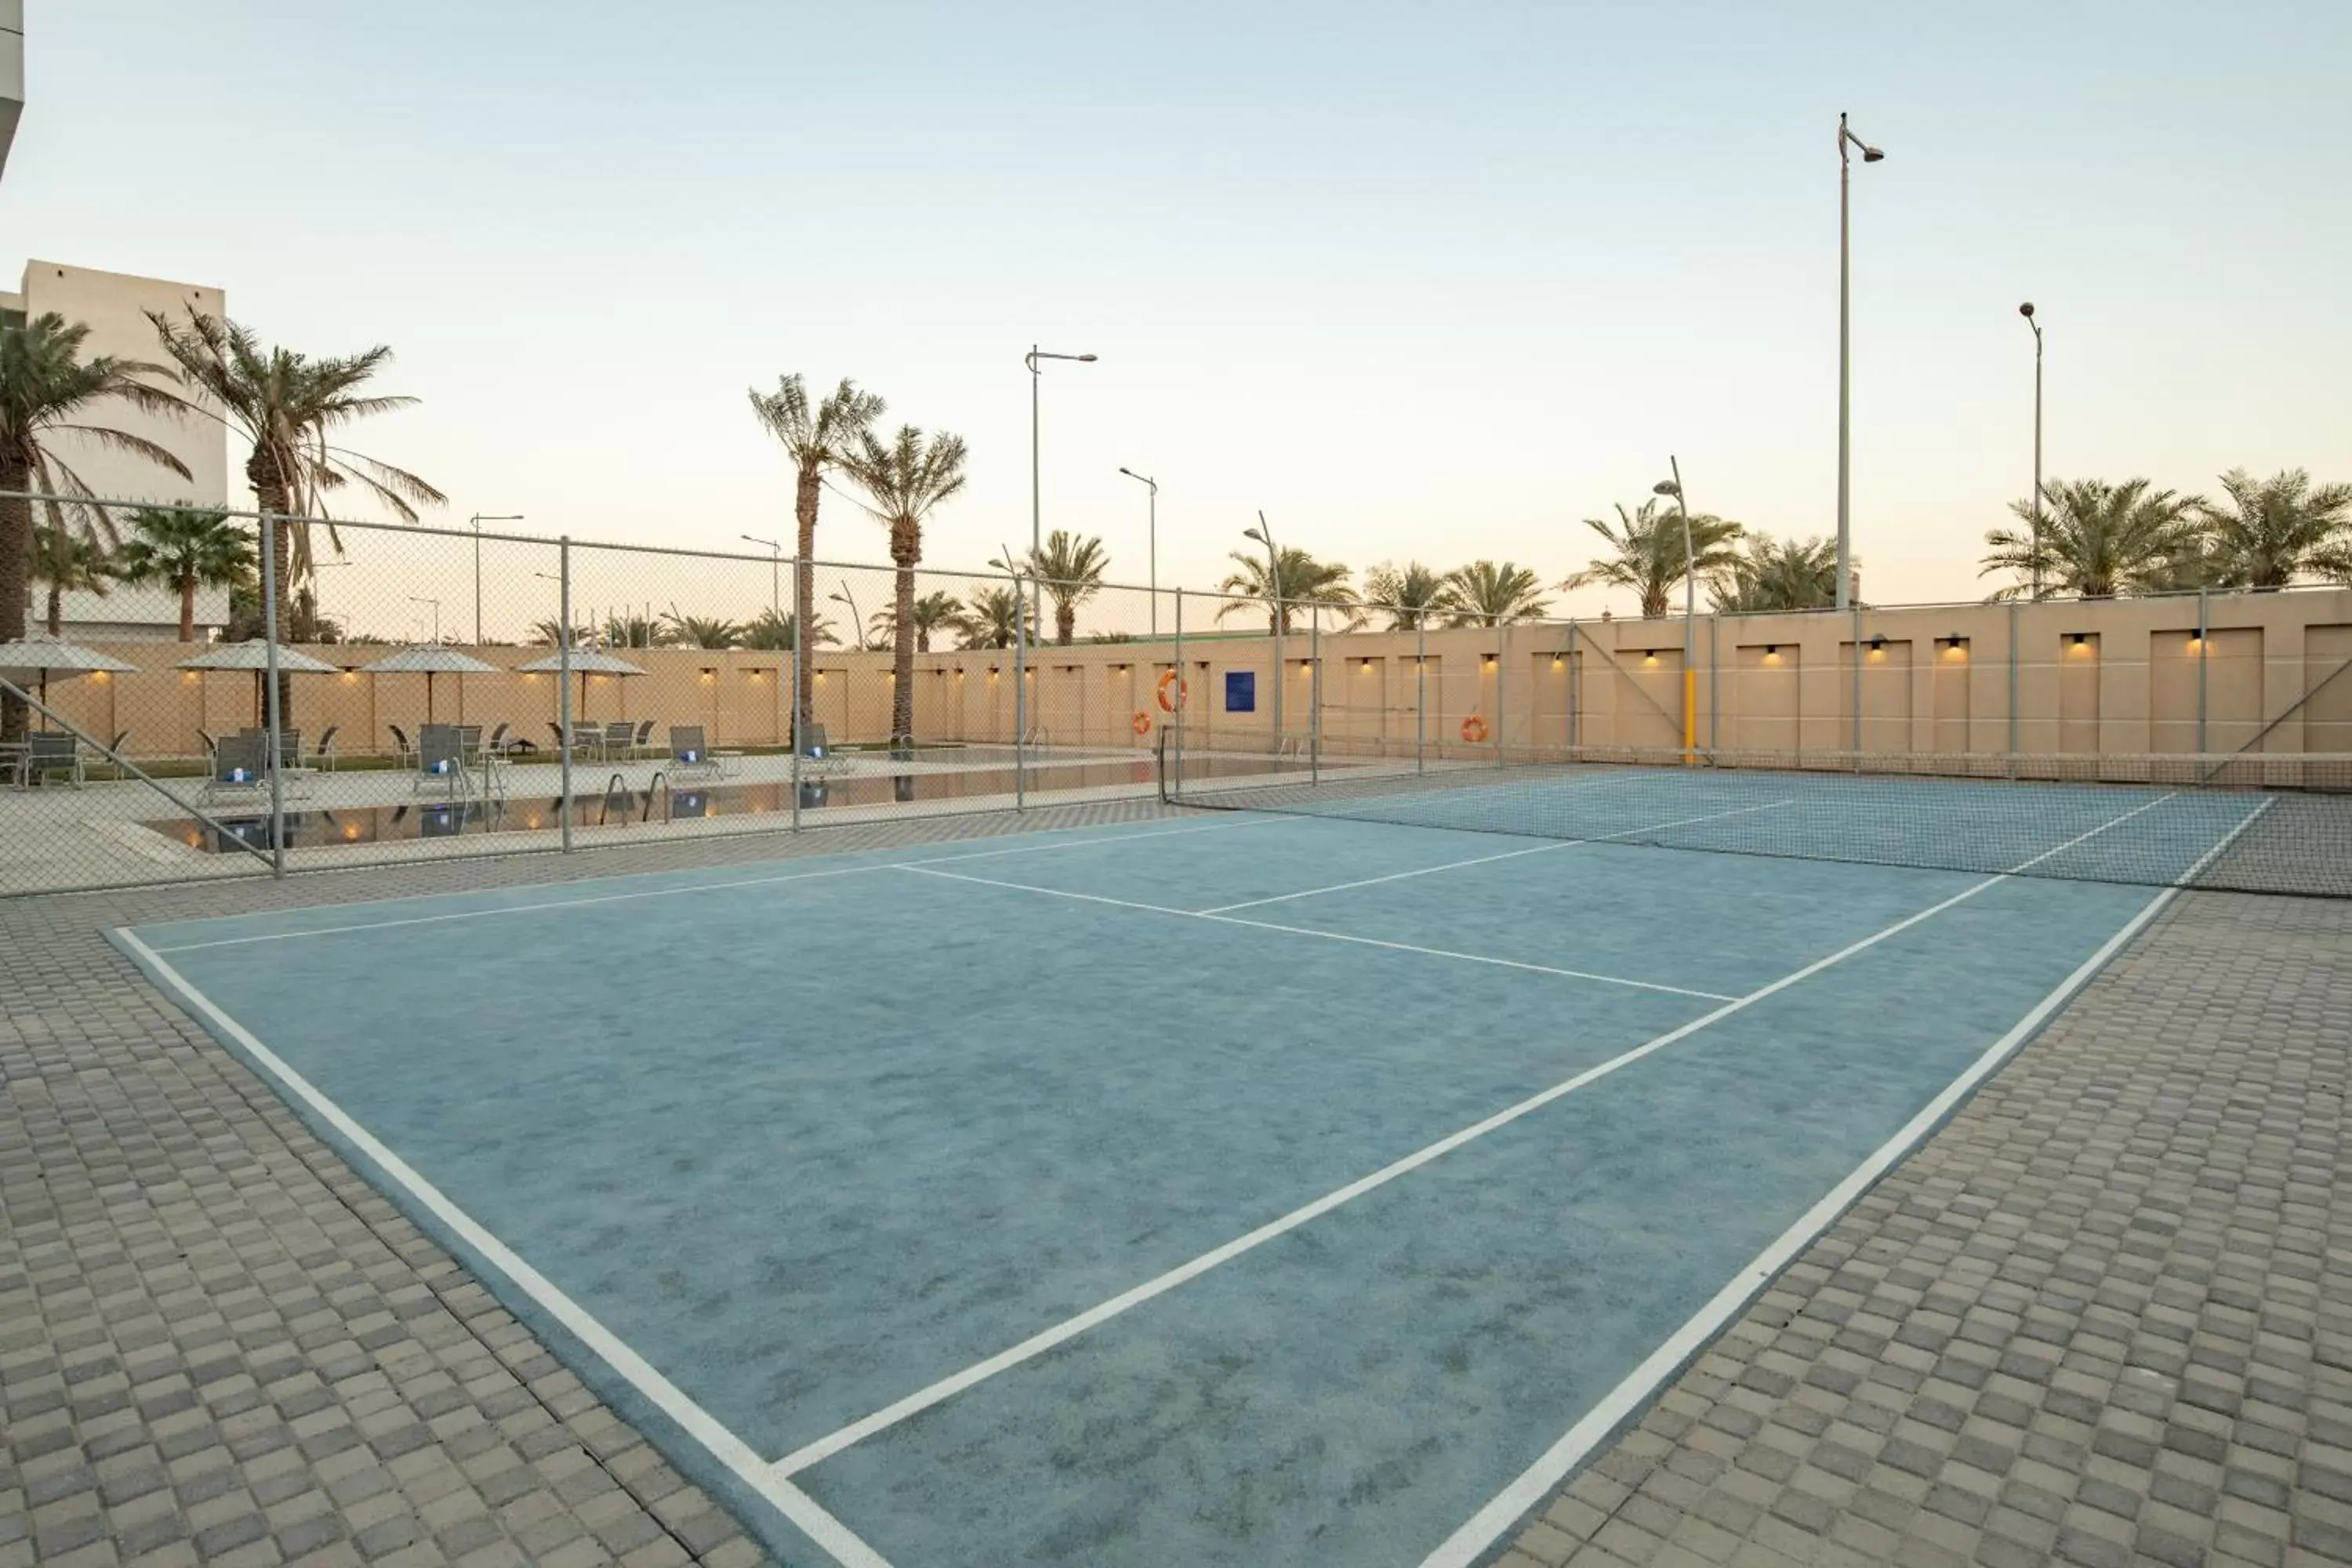 Tennis court, Other Activities in Radisson Hotel & Apartments Dammam Industry City